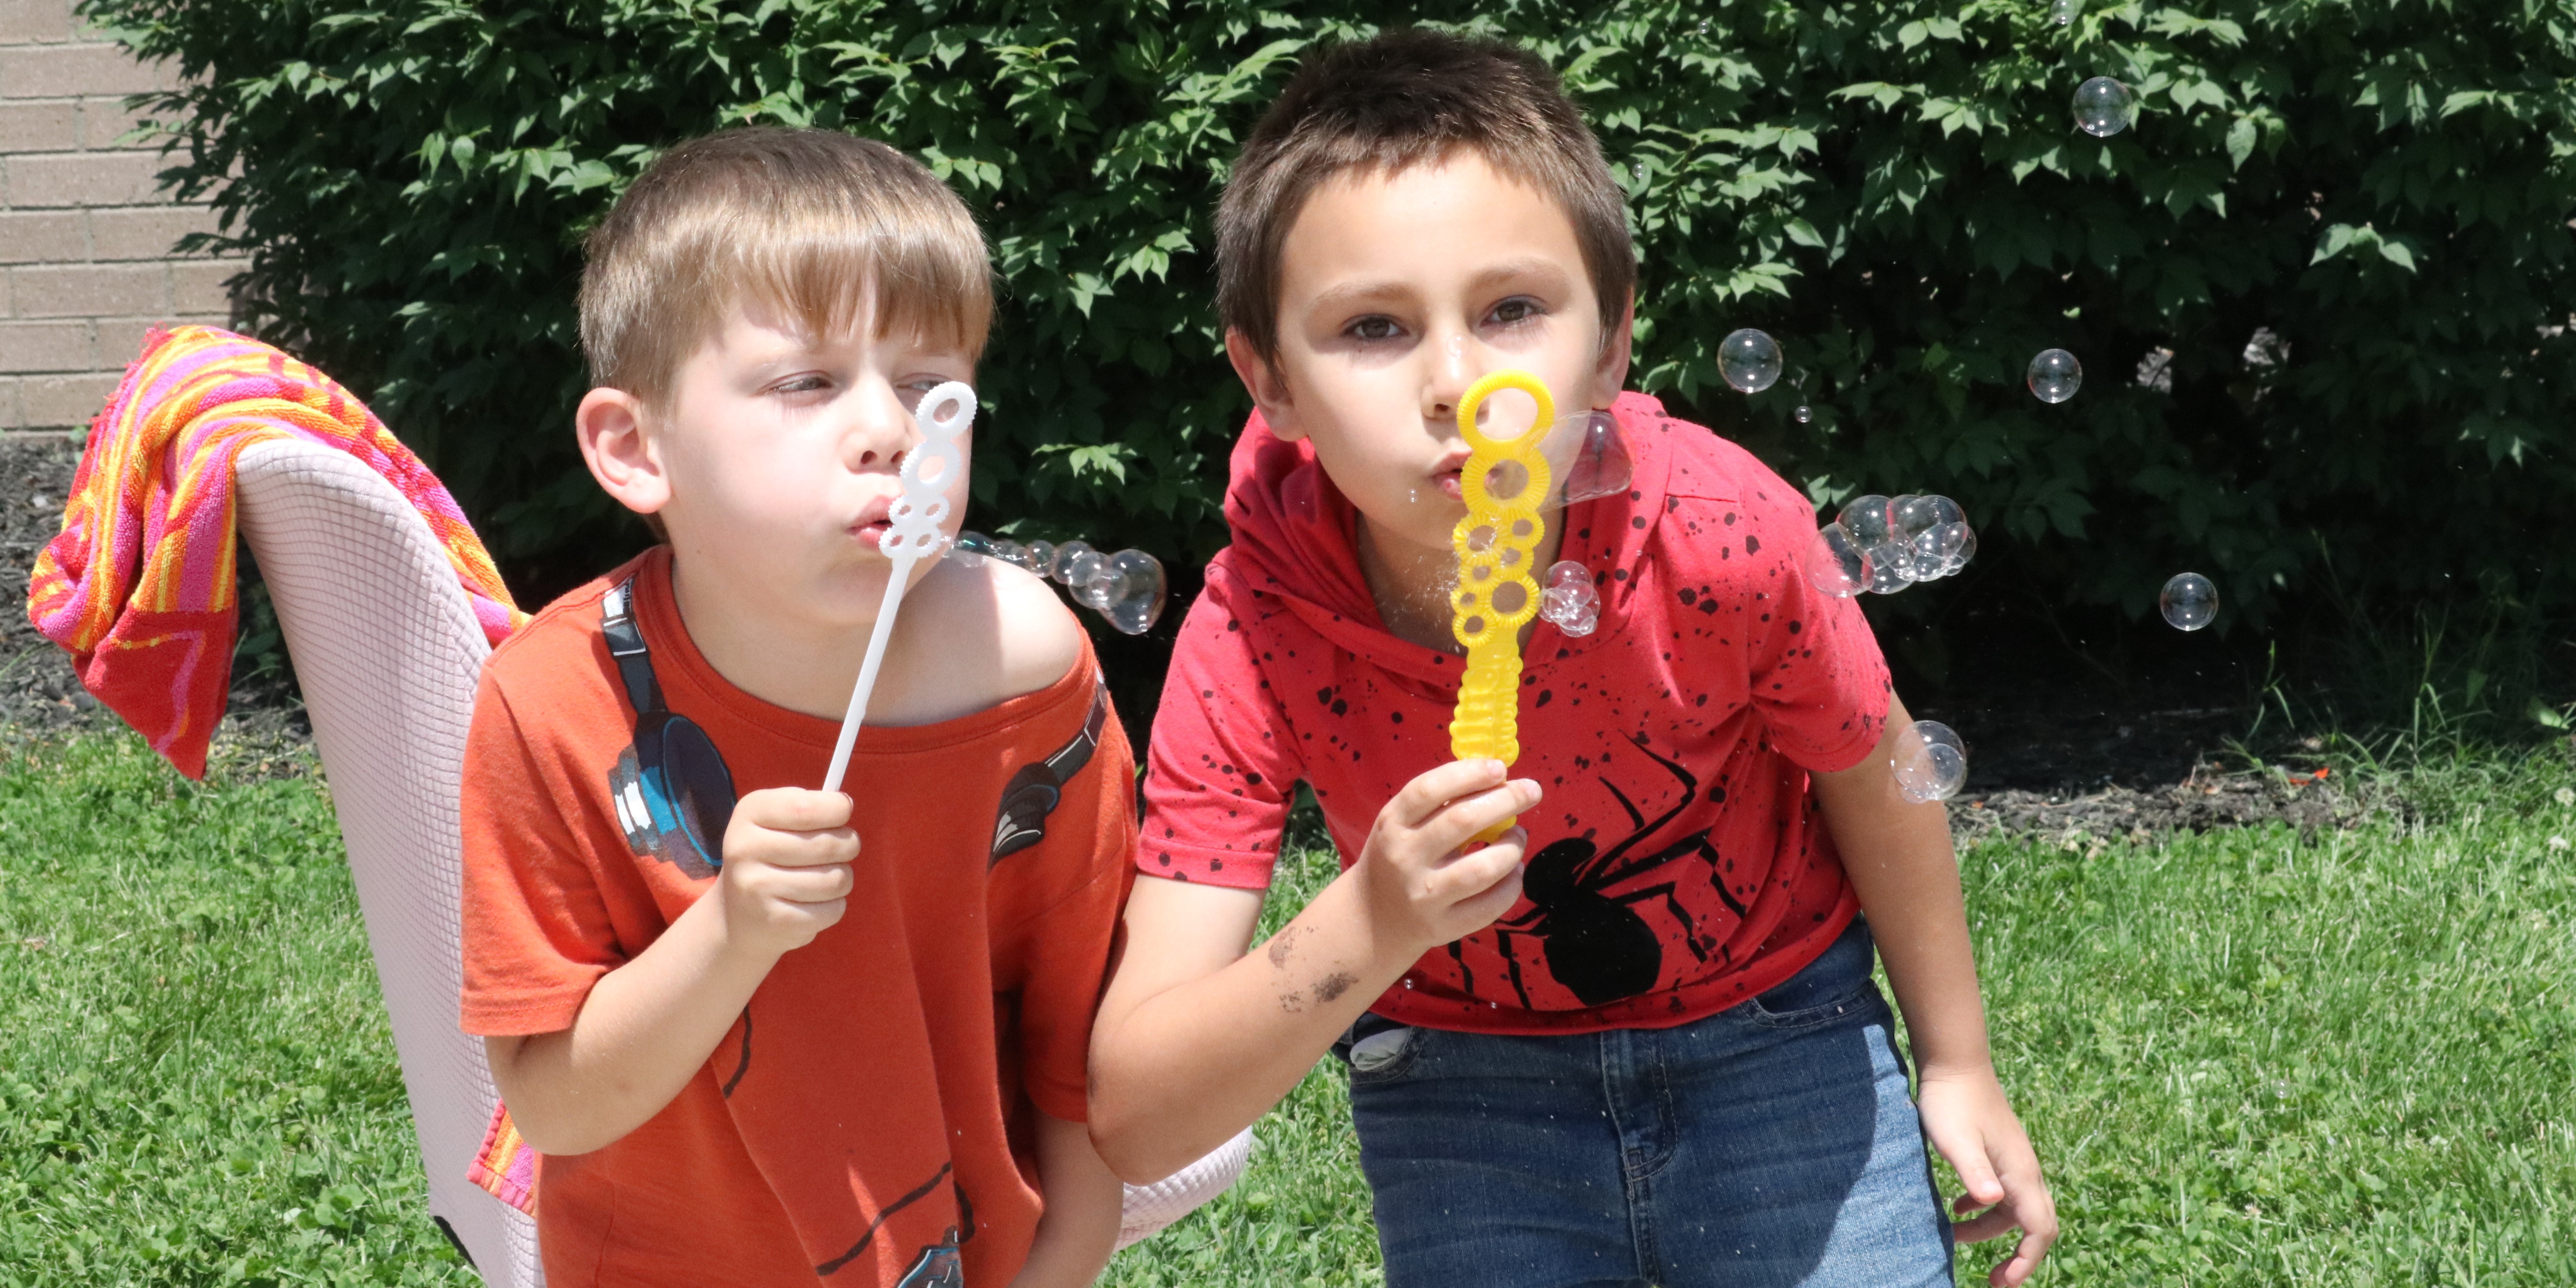 Students blowing bubbles